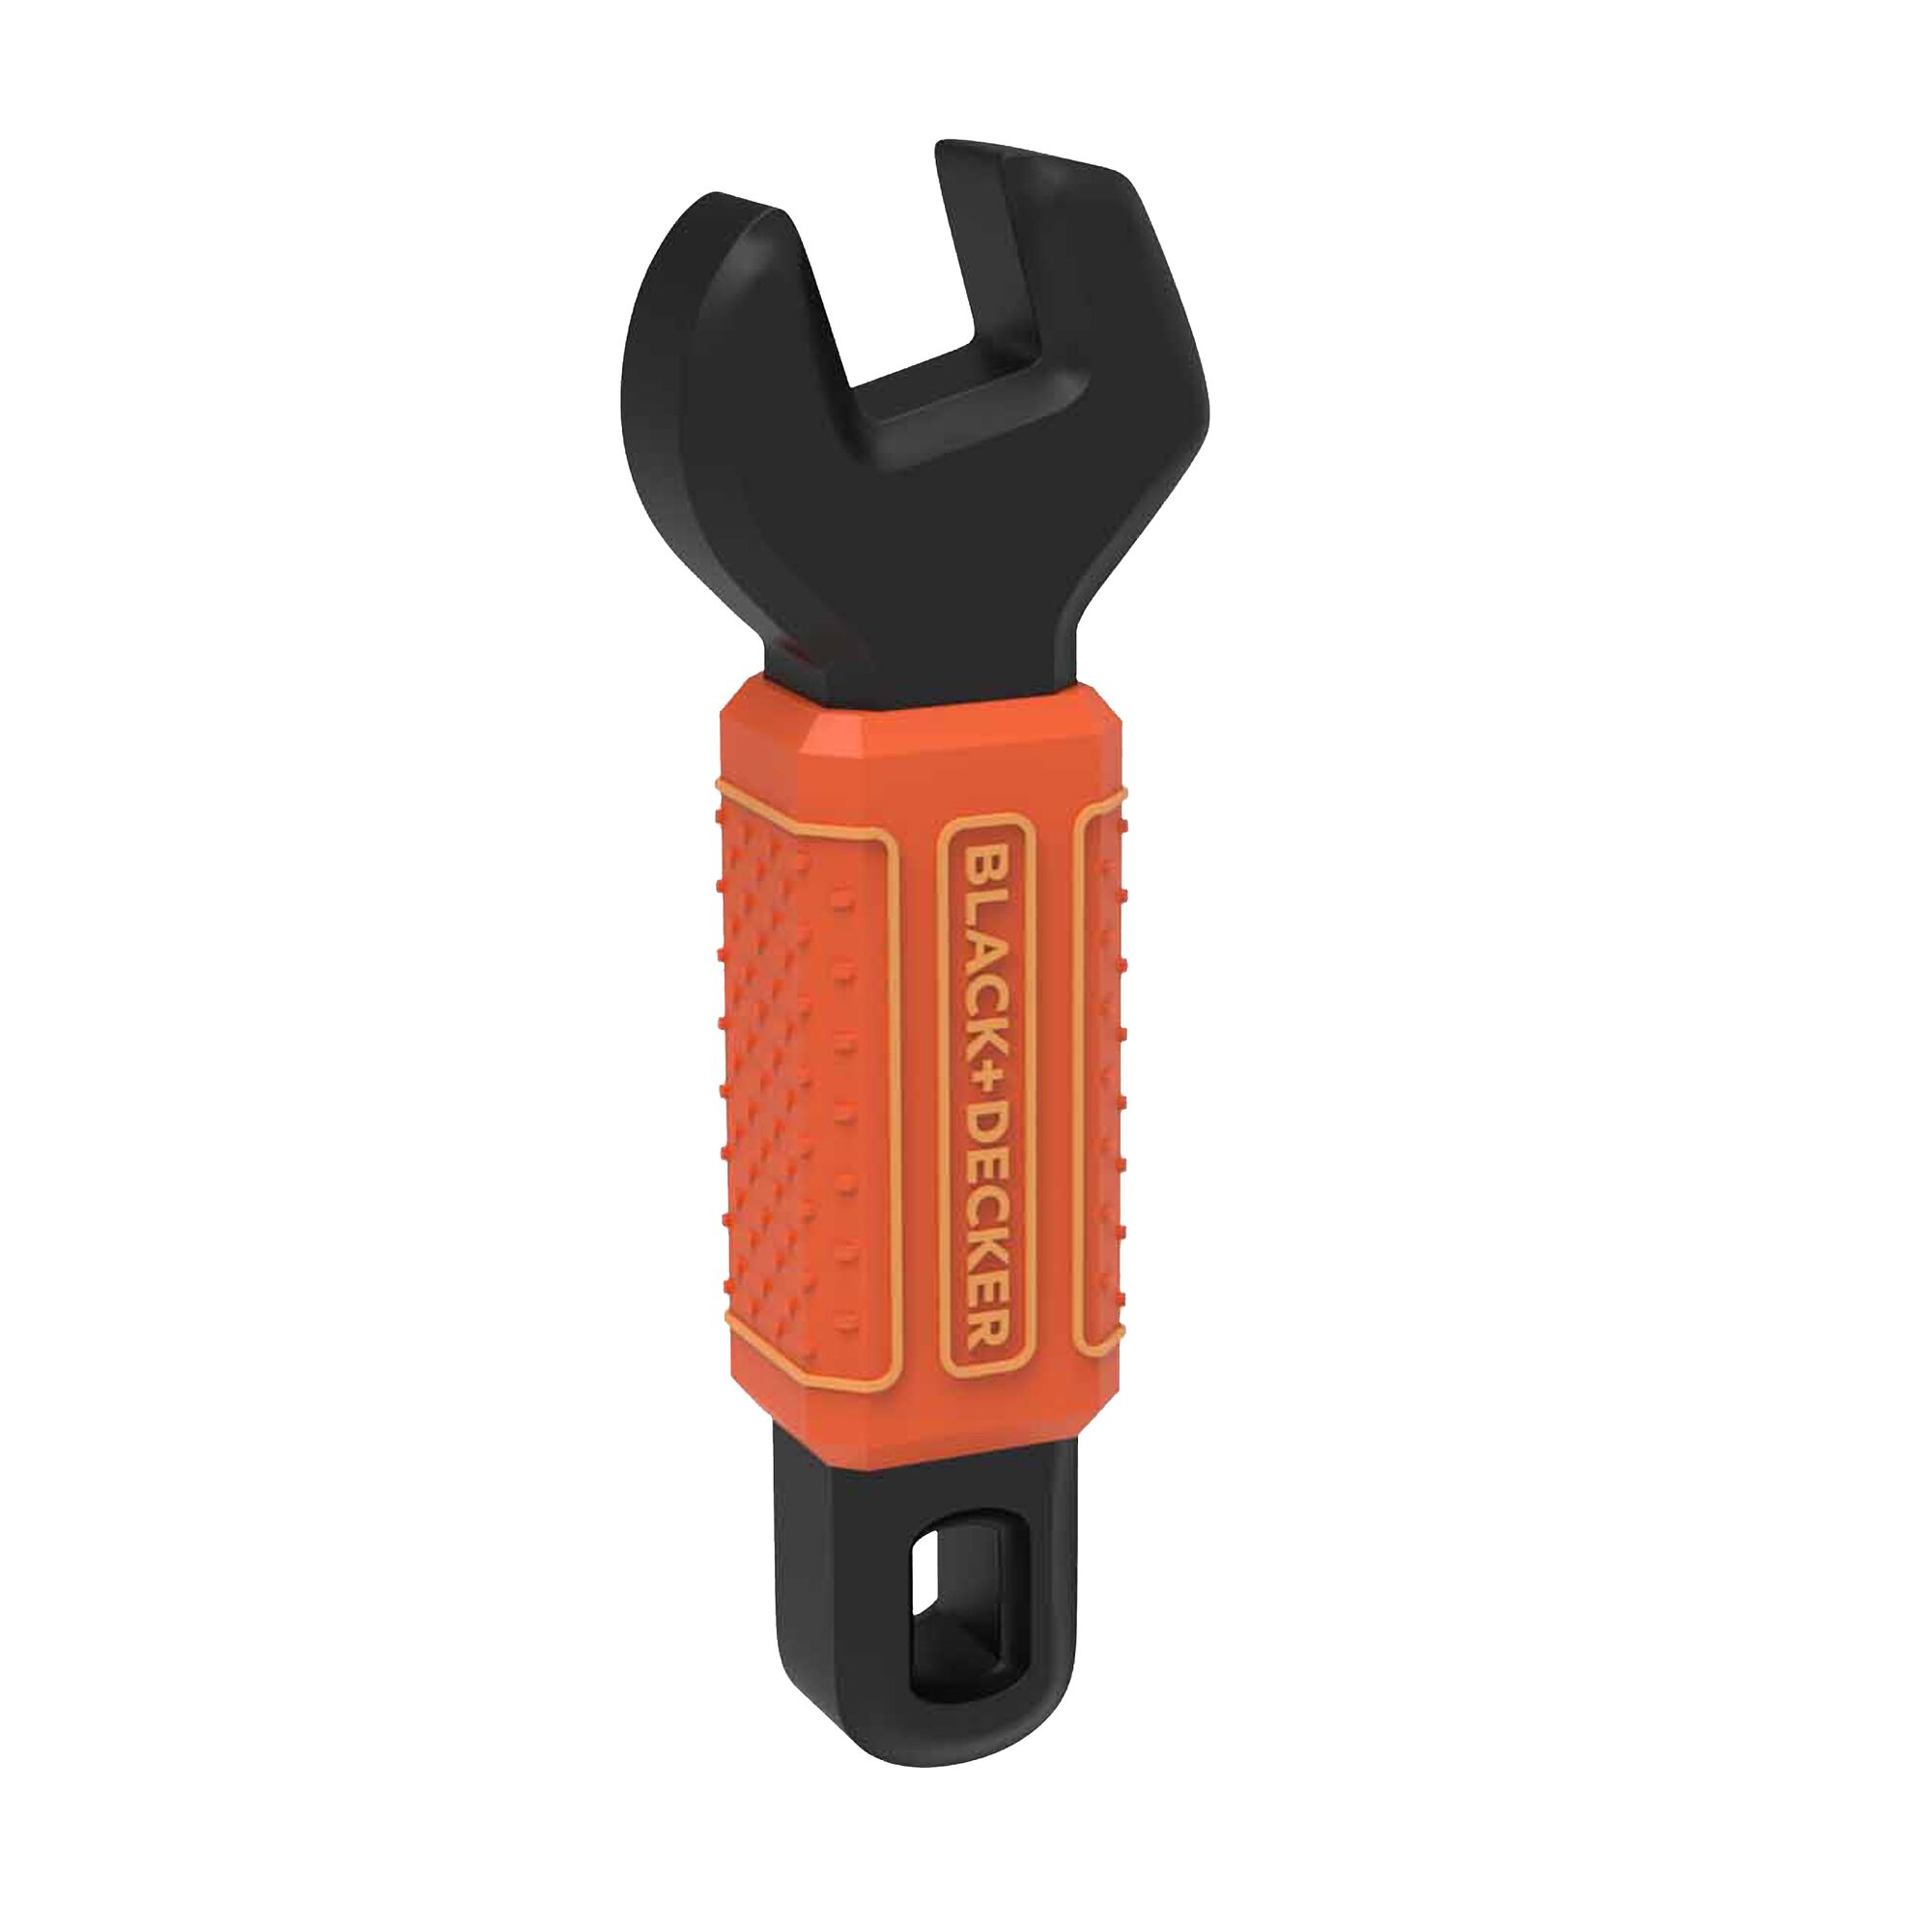 BLACK+DECKER orange and black colored hard rubber dog toy in shape of a wrench